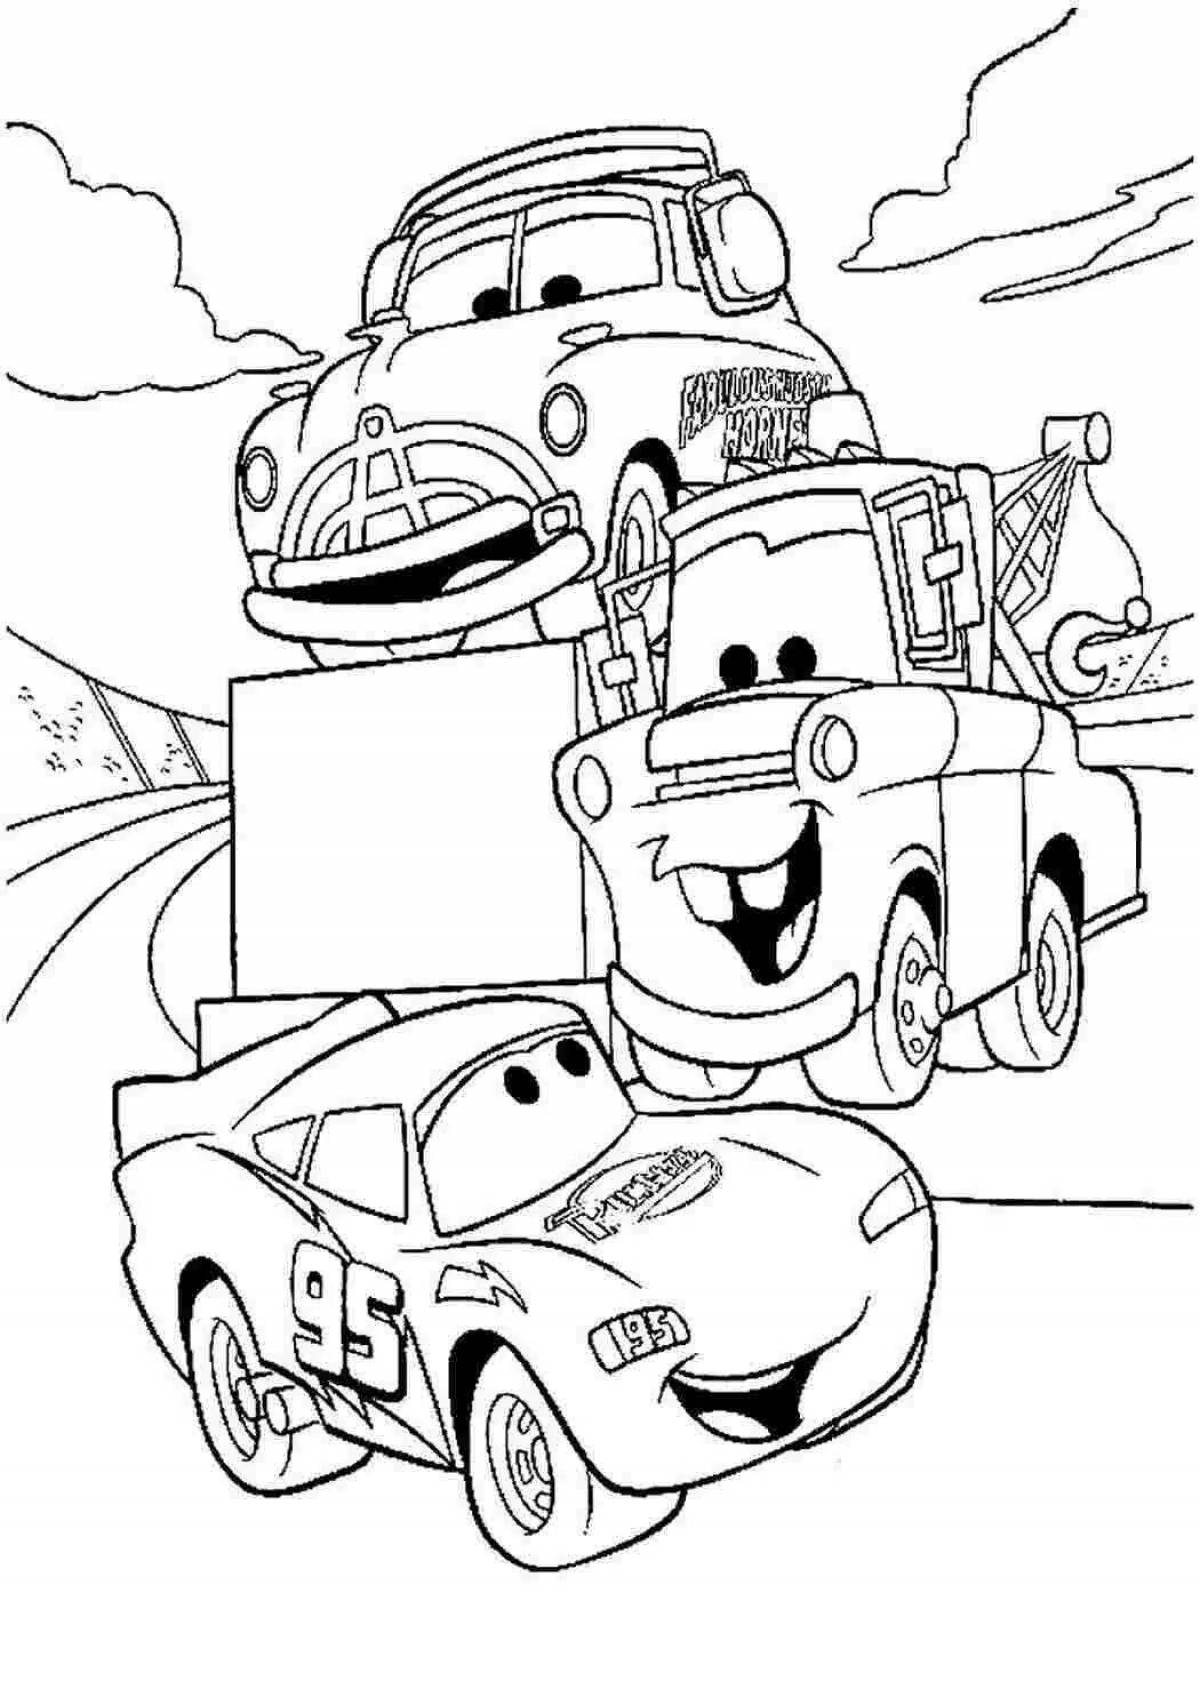 Coloring pages with flaunting cars for boys